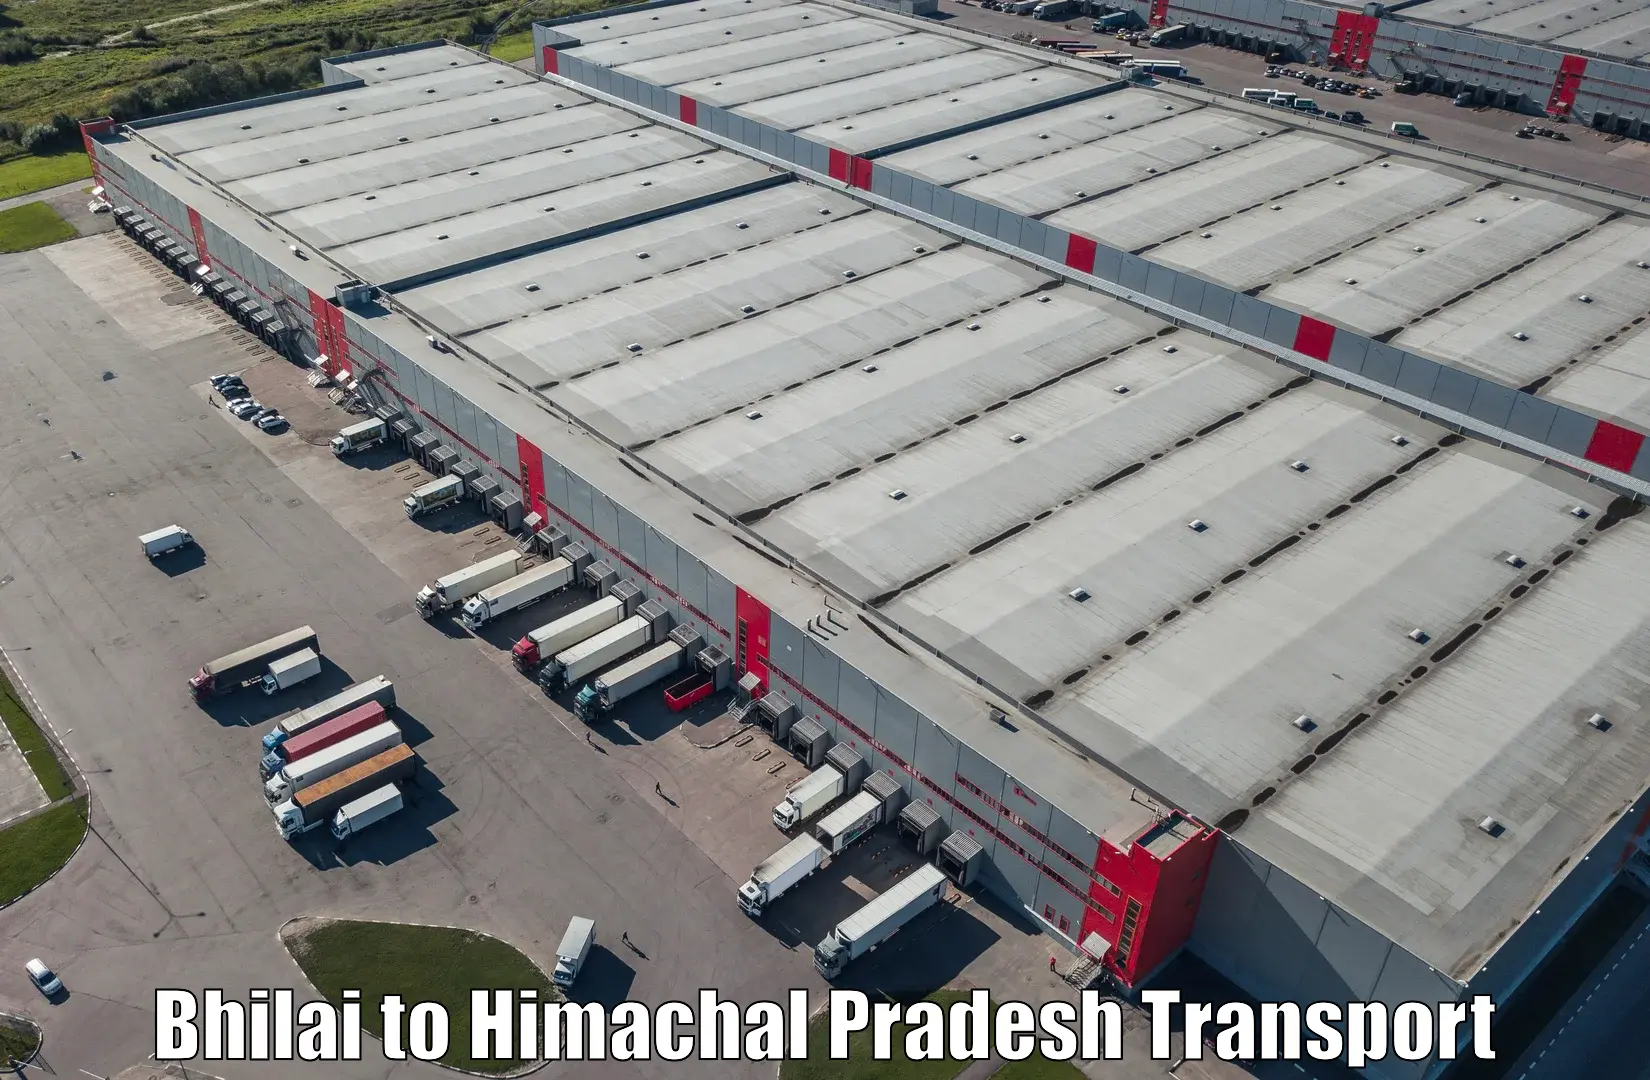 Truck transport companies in India Bhilai to Waknaghat